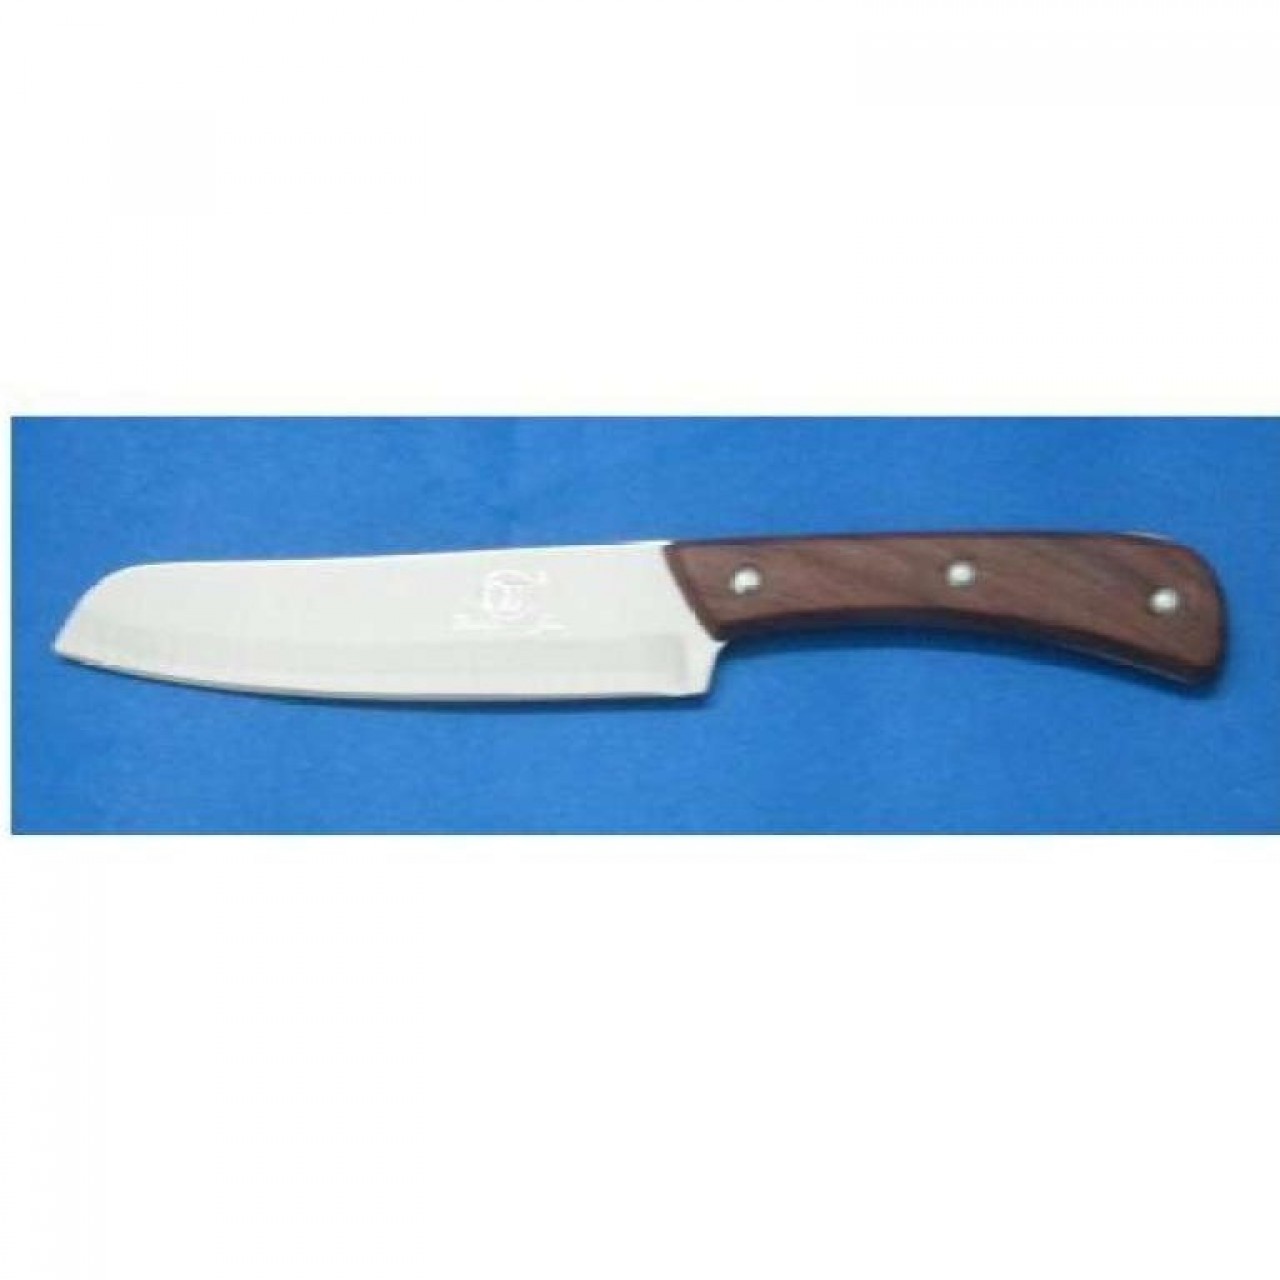 Very Unique And Sharp Knife Brown Handle